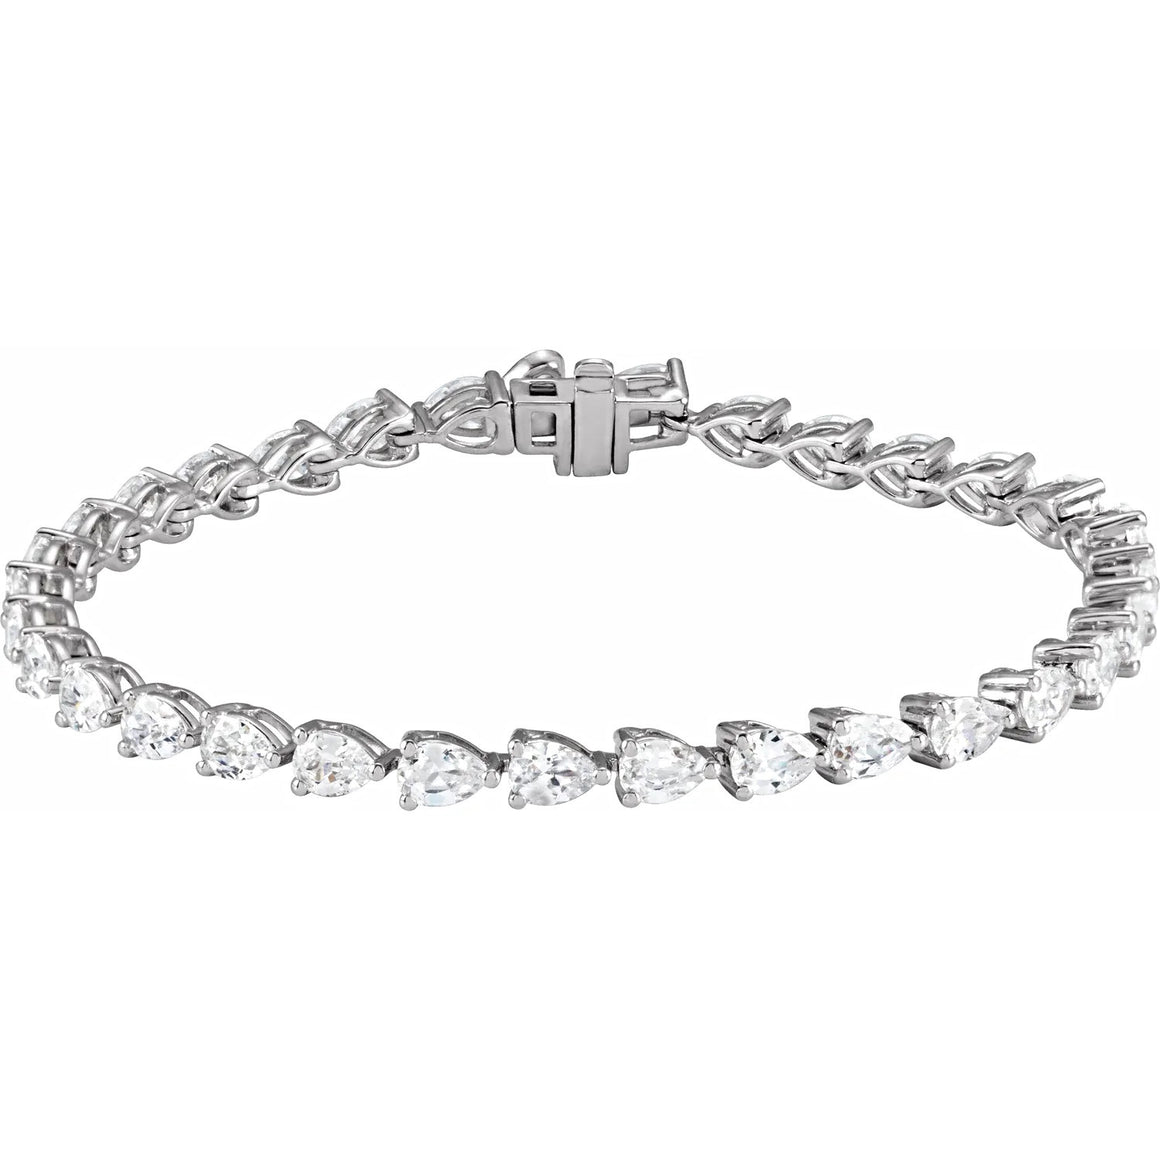 6 And 1/2 Carat Pear Shaped Lab-Grown Diamond Tennis Bracelet In Solid 14K White Gold